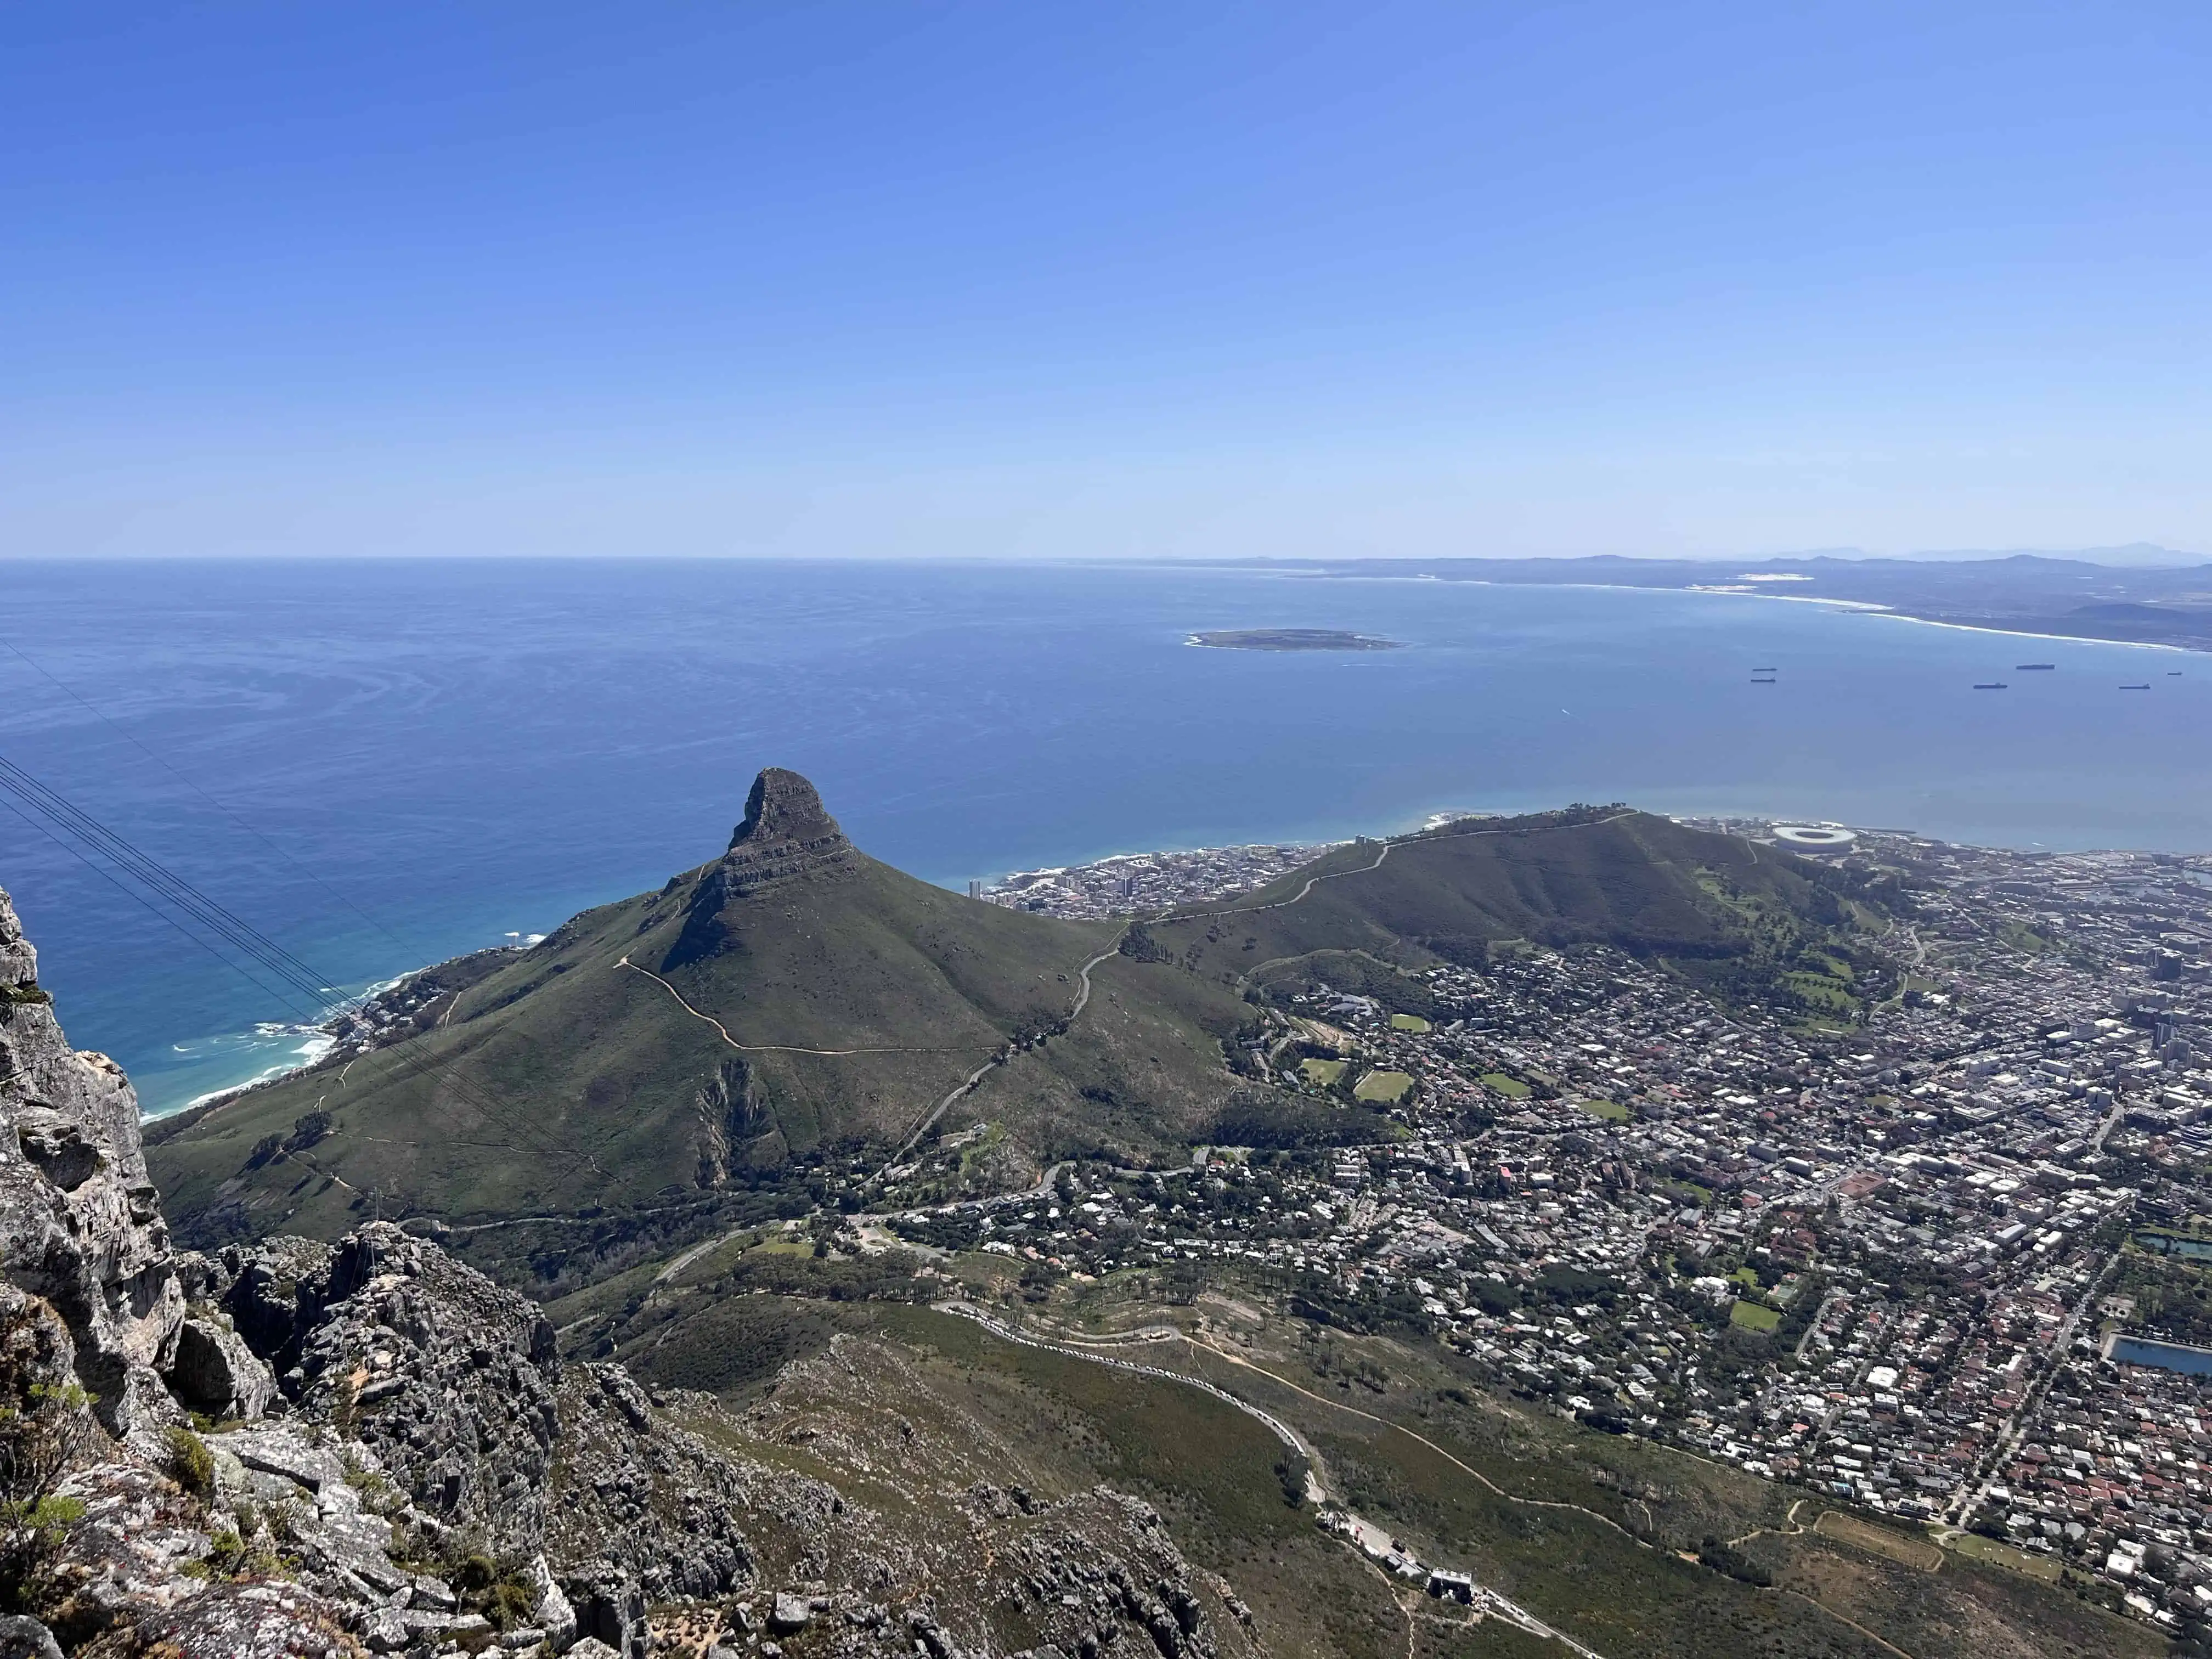 Africa Travel Blog (9/14/22): Arriving in Cape Town, South Africa